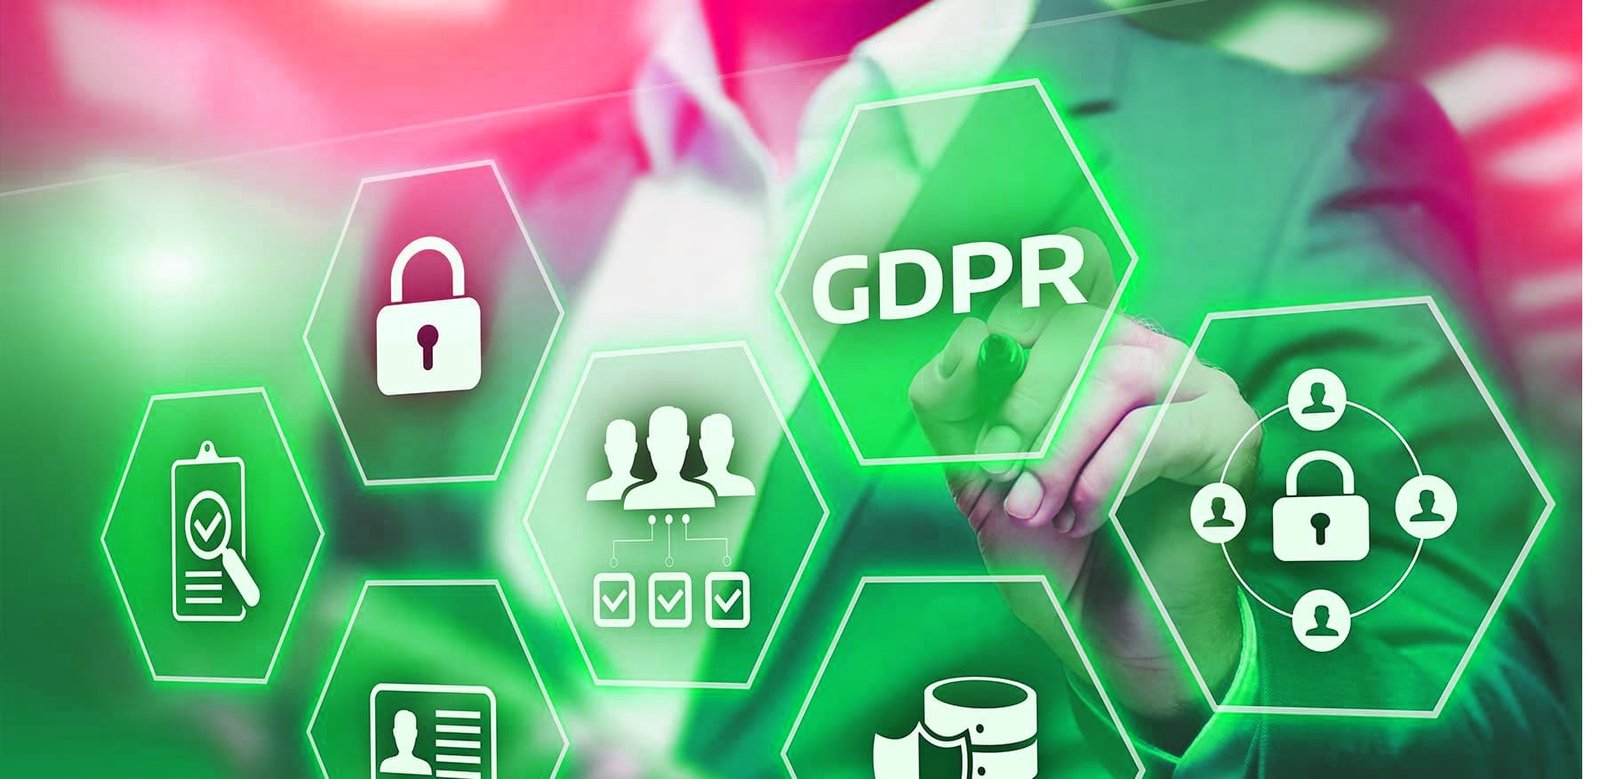 Corporate GDPR Compliance and Data Privacy